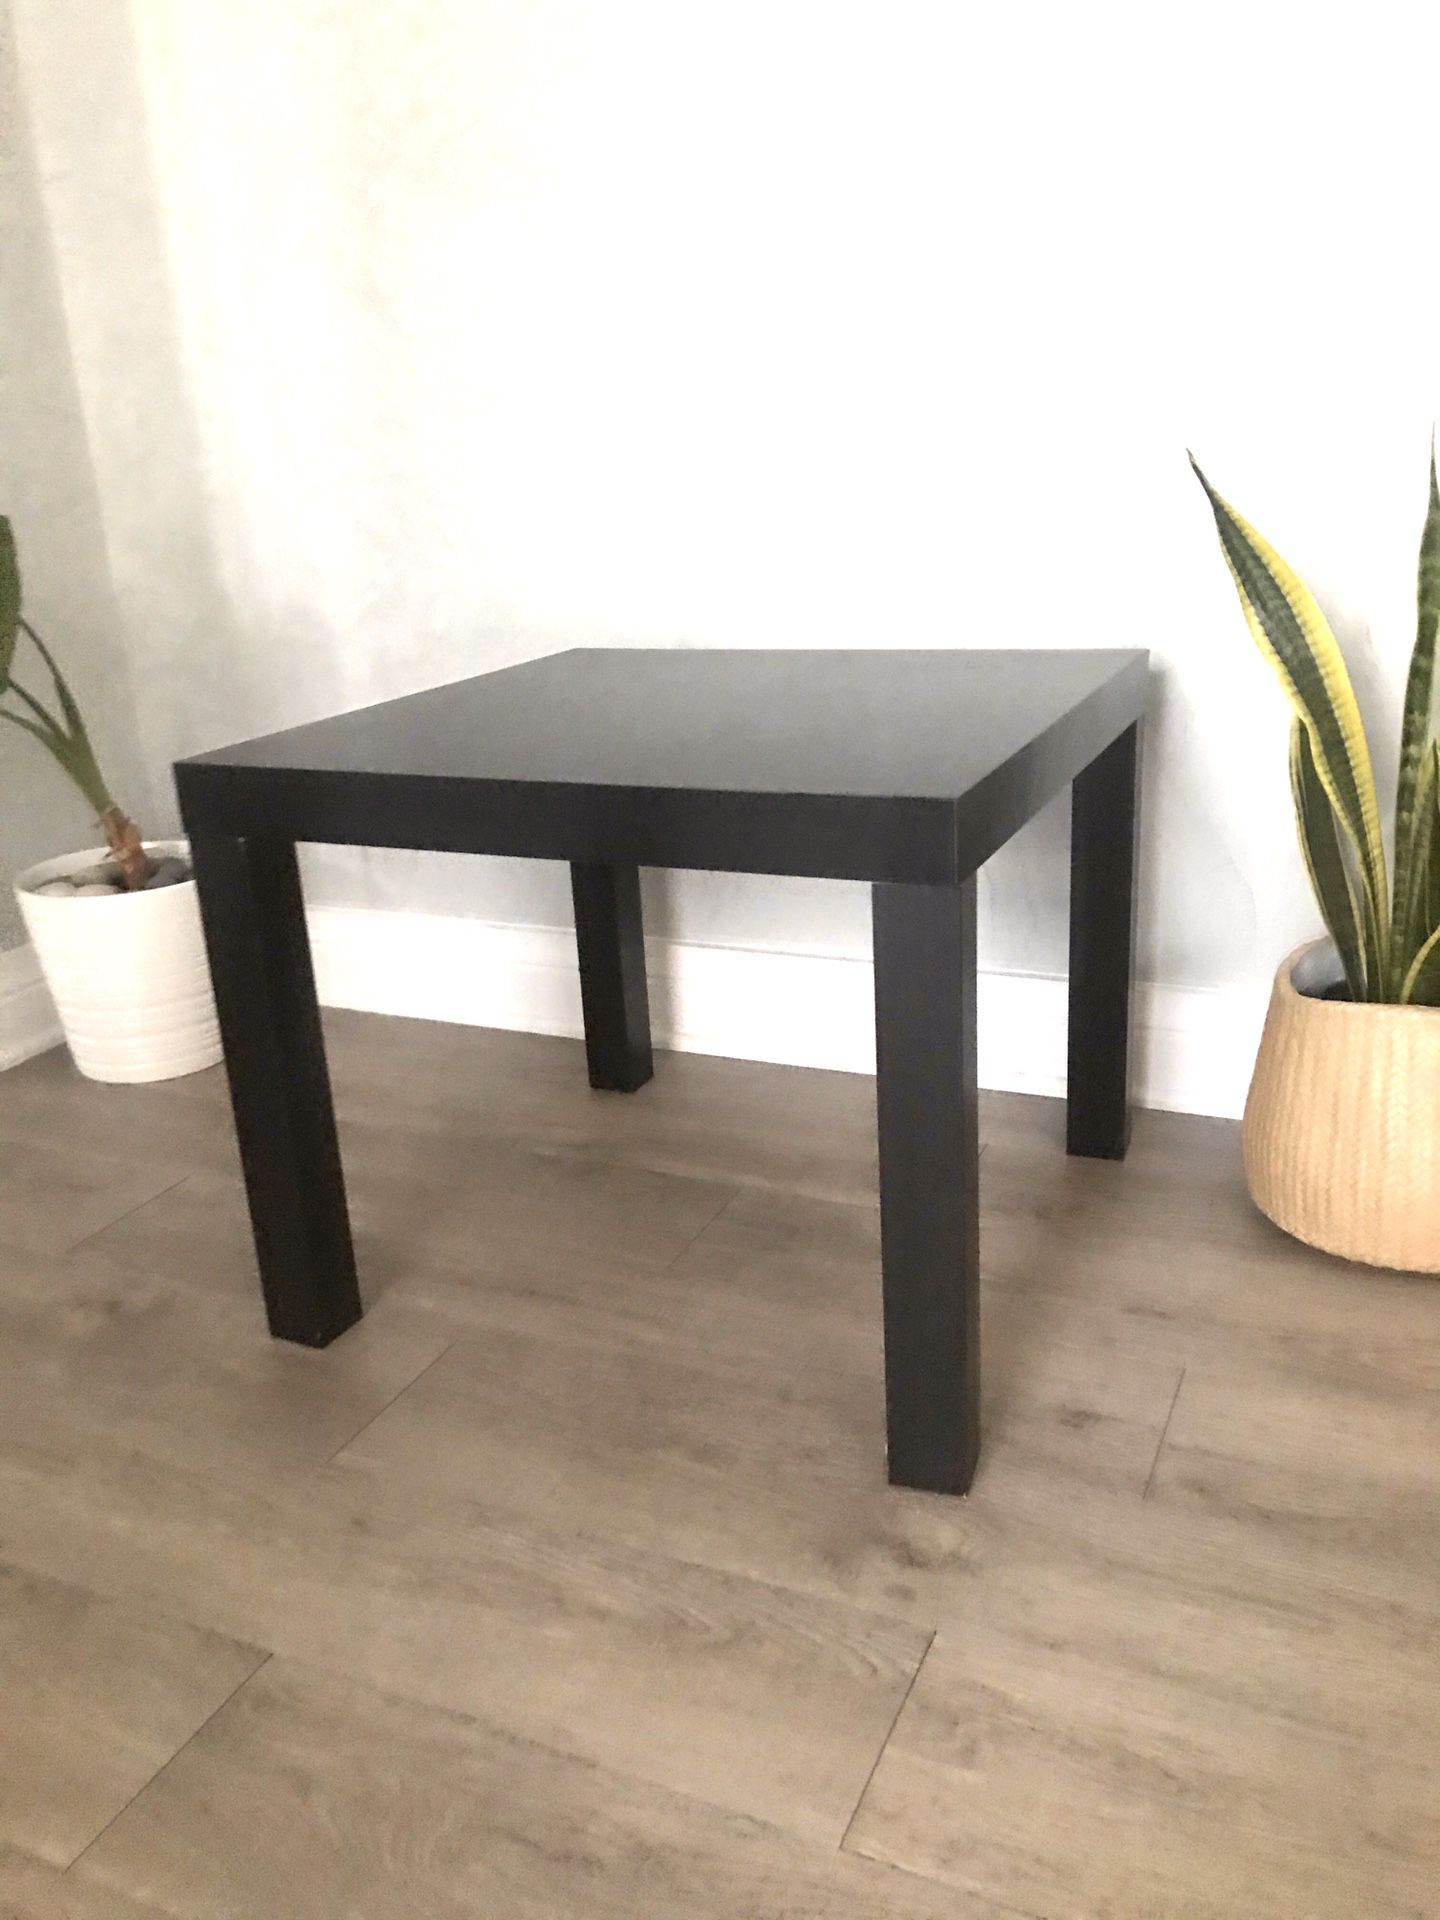 End & Side Table L21.5/W21.5/H18 $25